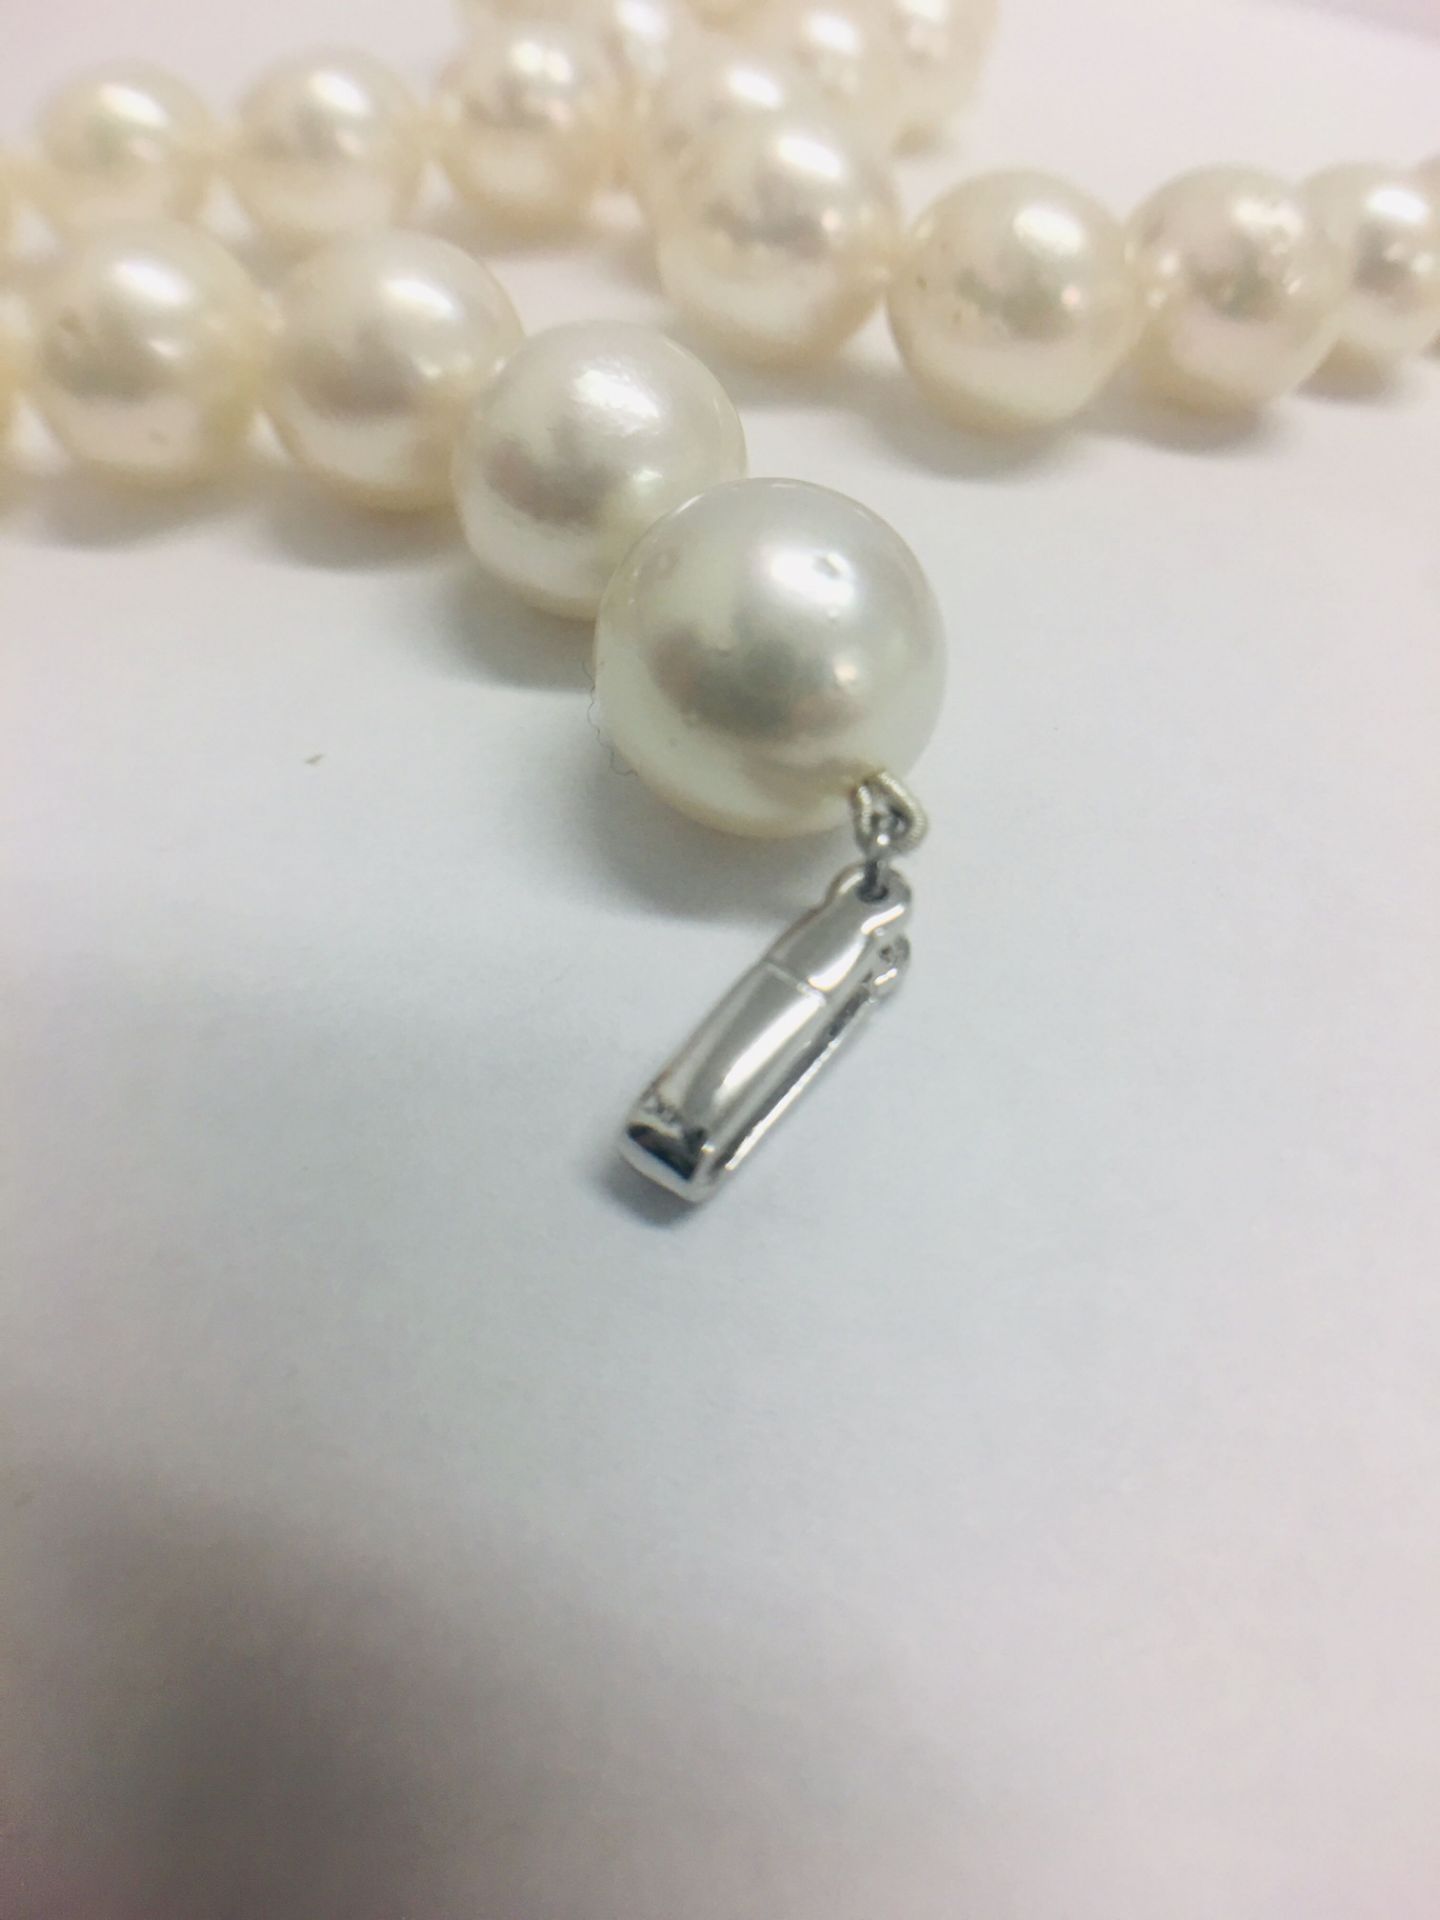 Strand 35 South Sea Pearls with 14ct White Gold Filagree Style Ball - Image 8 of 9